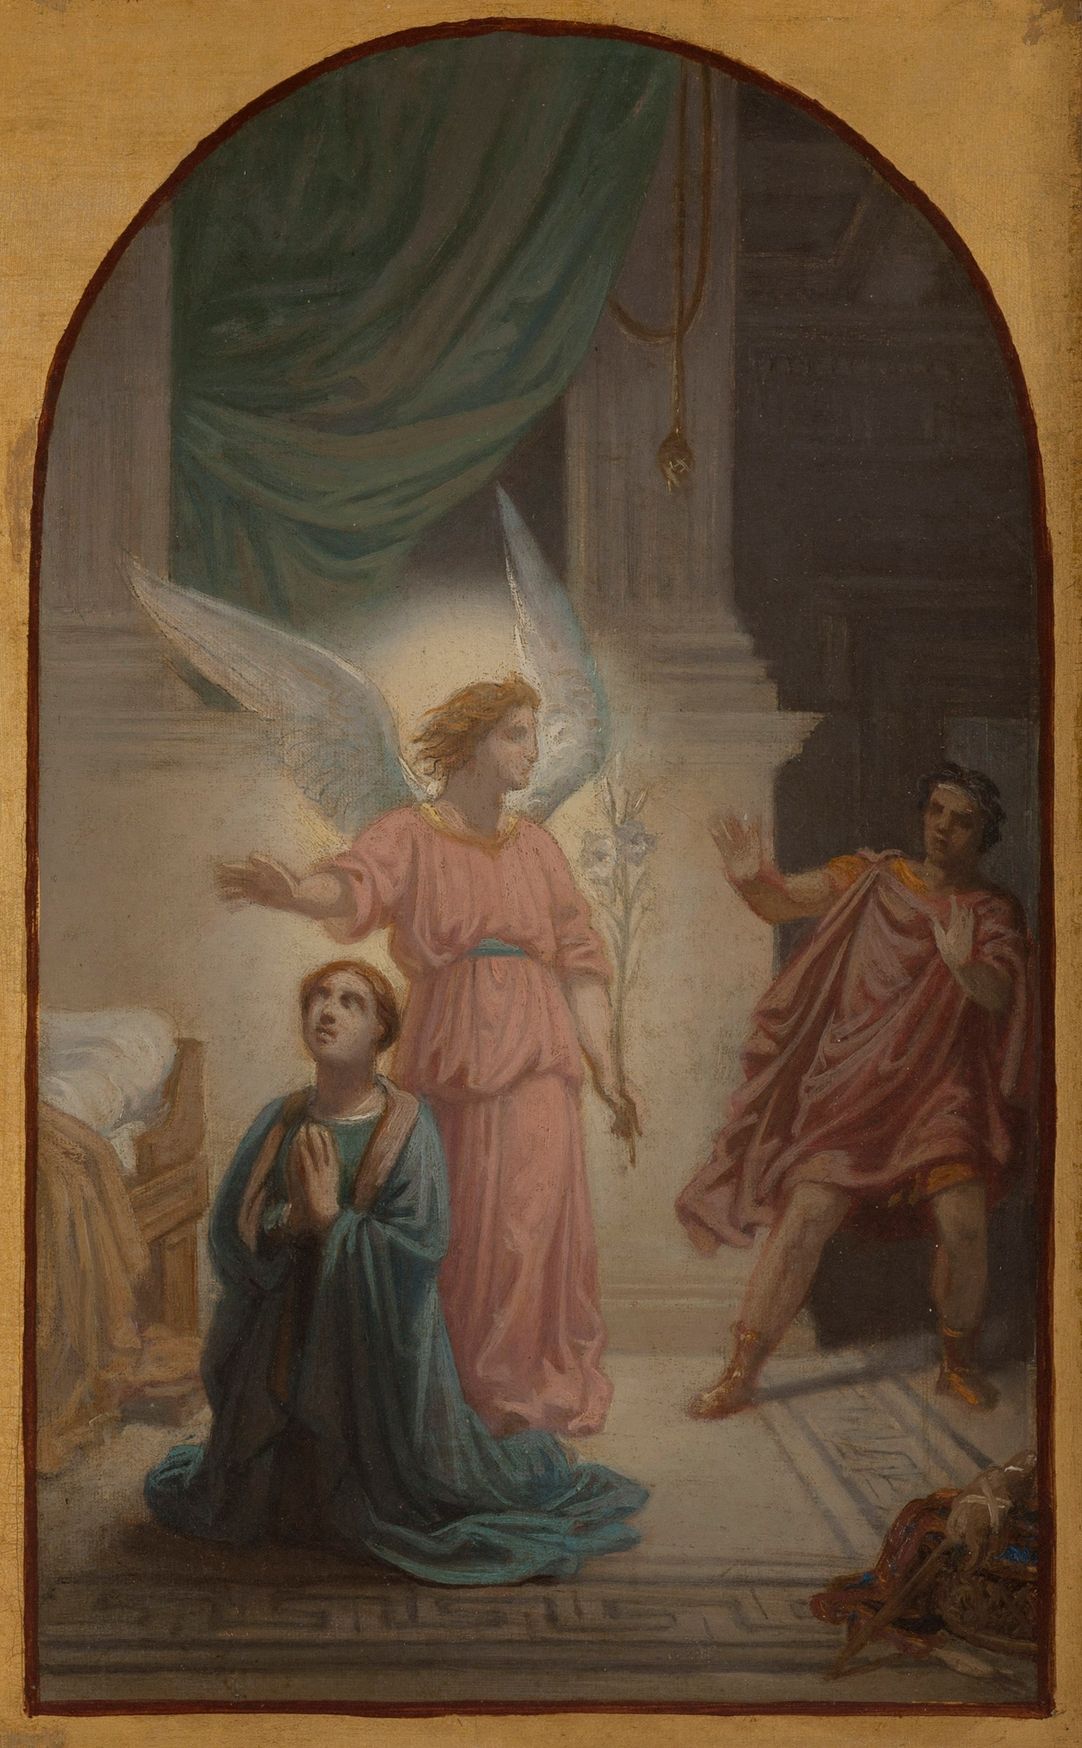 Maximian Recoiling at the Sight of the Angel Who Protects Saint Suzanne (1857) by Sébastien Norblin de la Gourdaine - Public Domain Catholic Painting